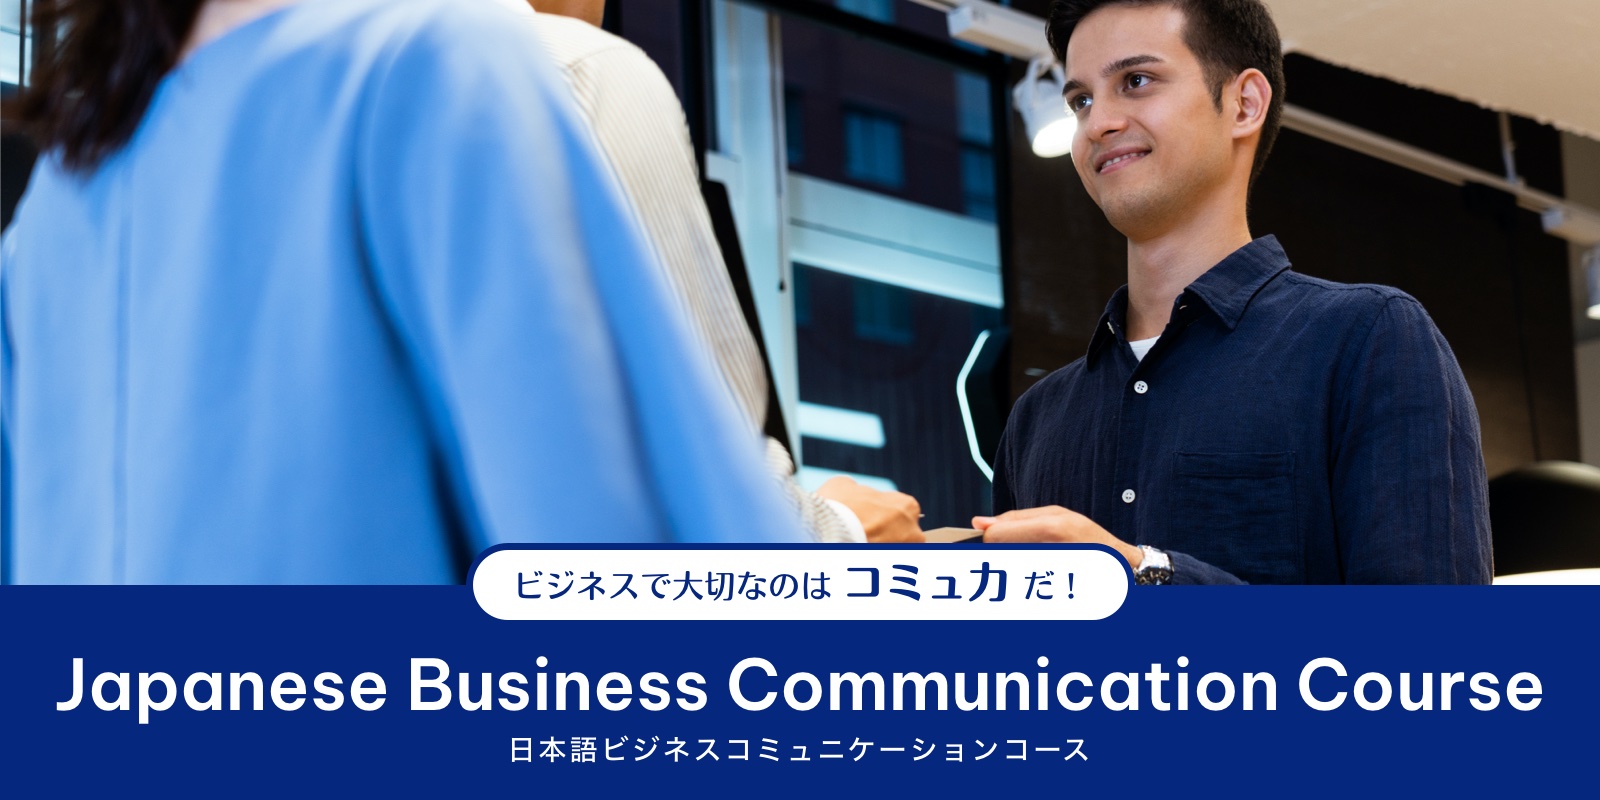 Japanese Business Communication course